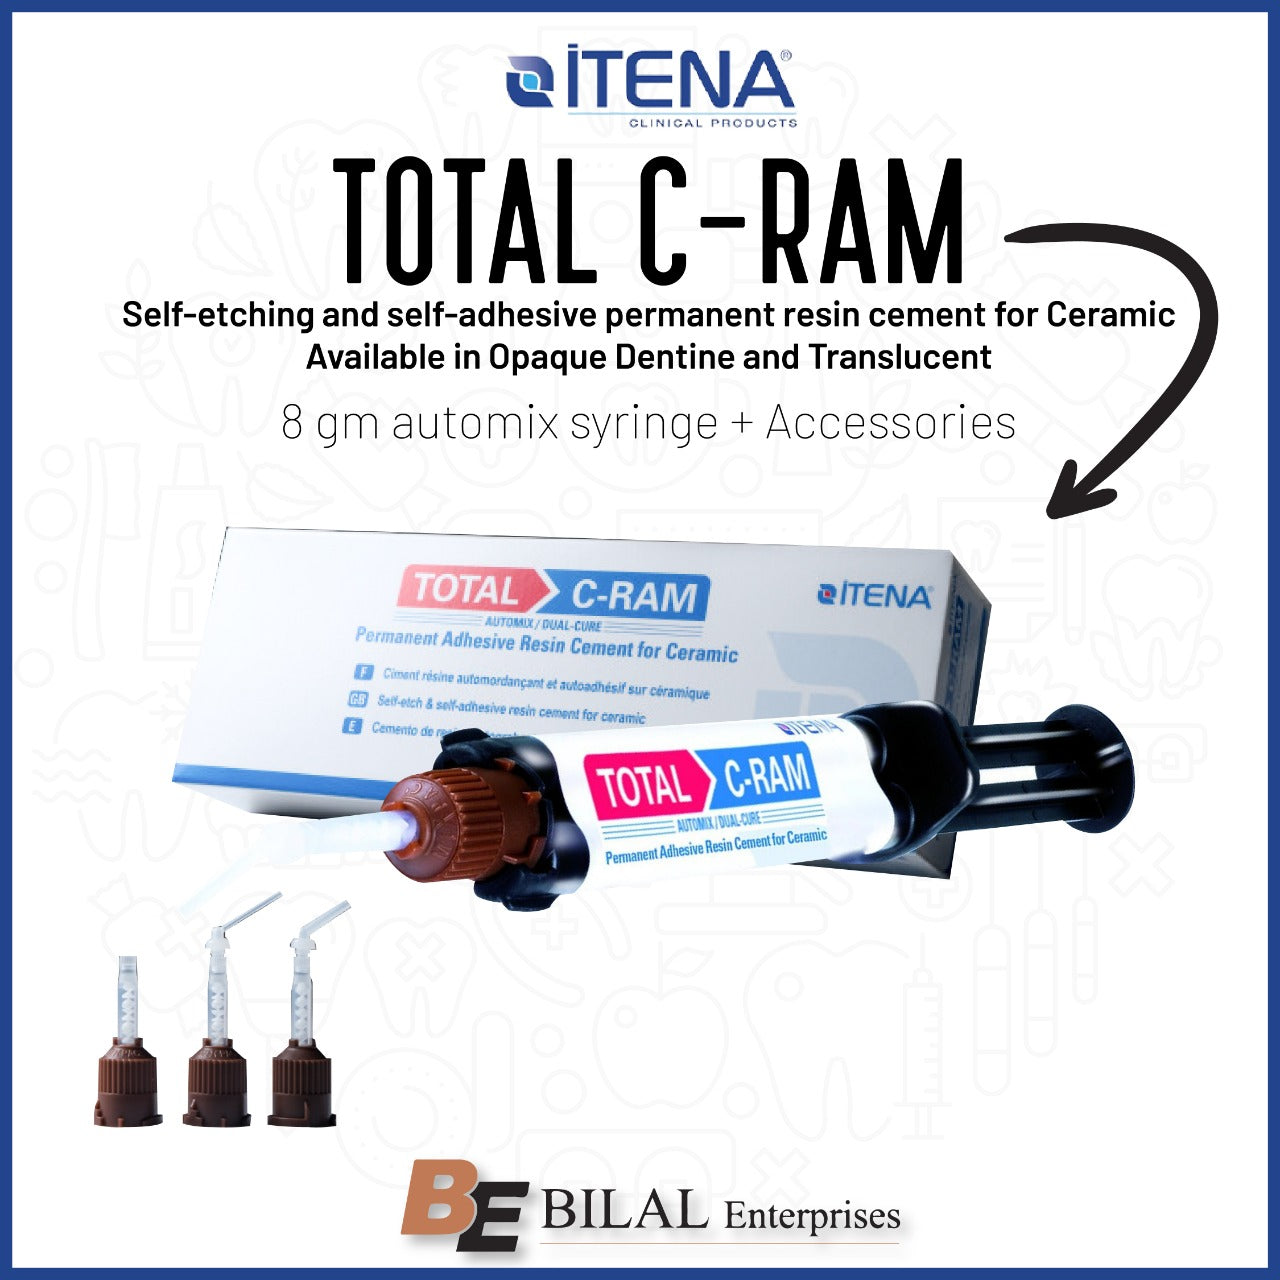 Itena Clinical - Total C-Ram (self-etching and self-adhesive permanent resin cement)